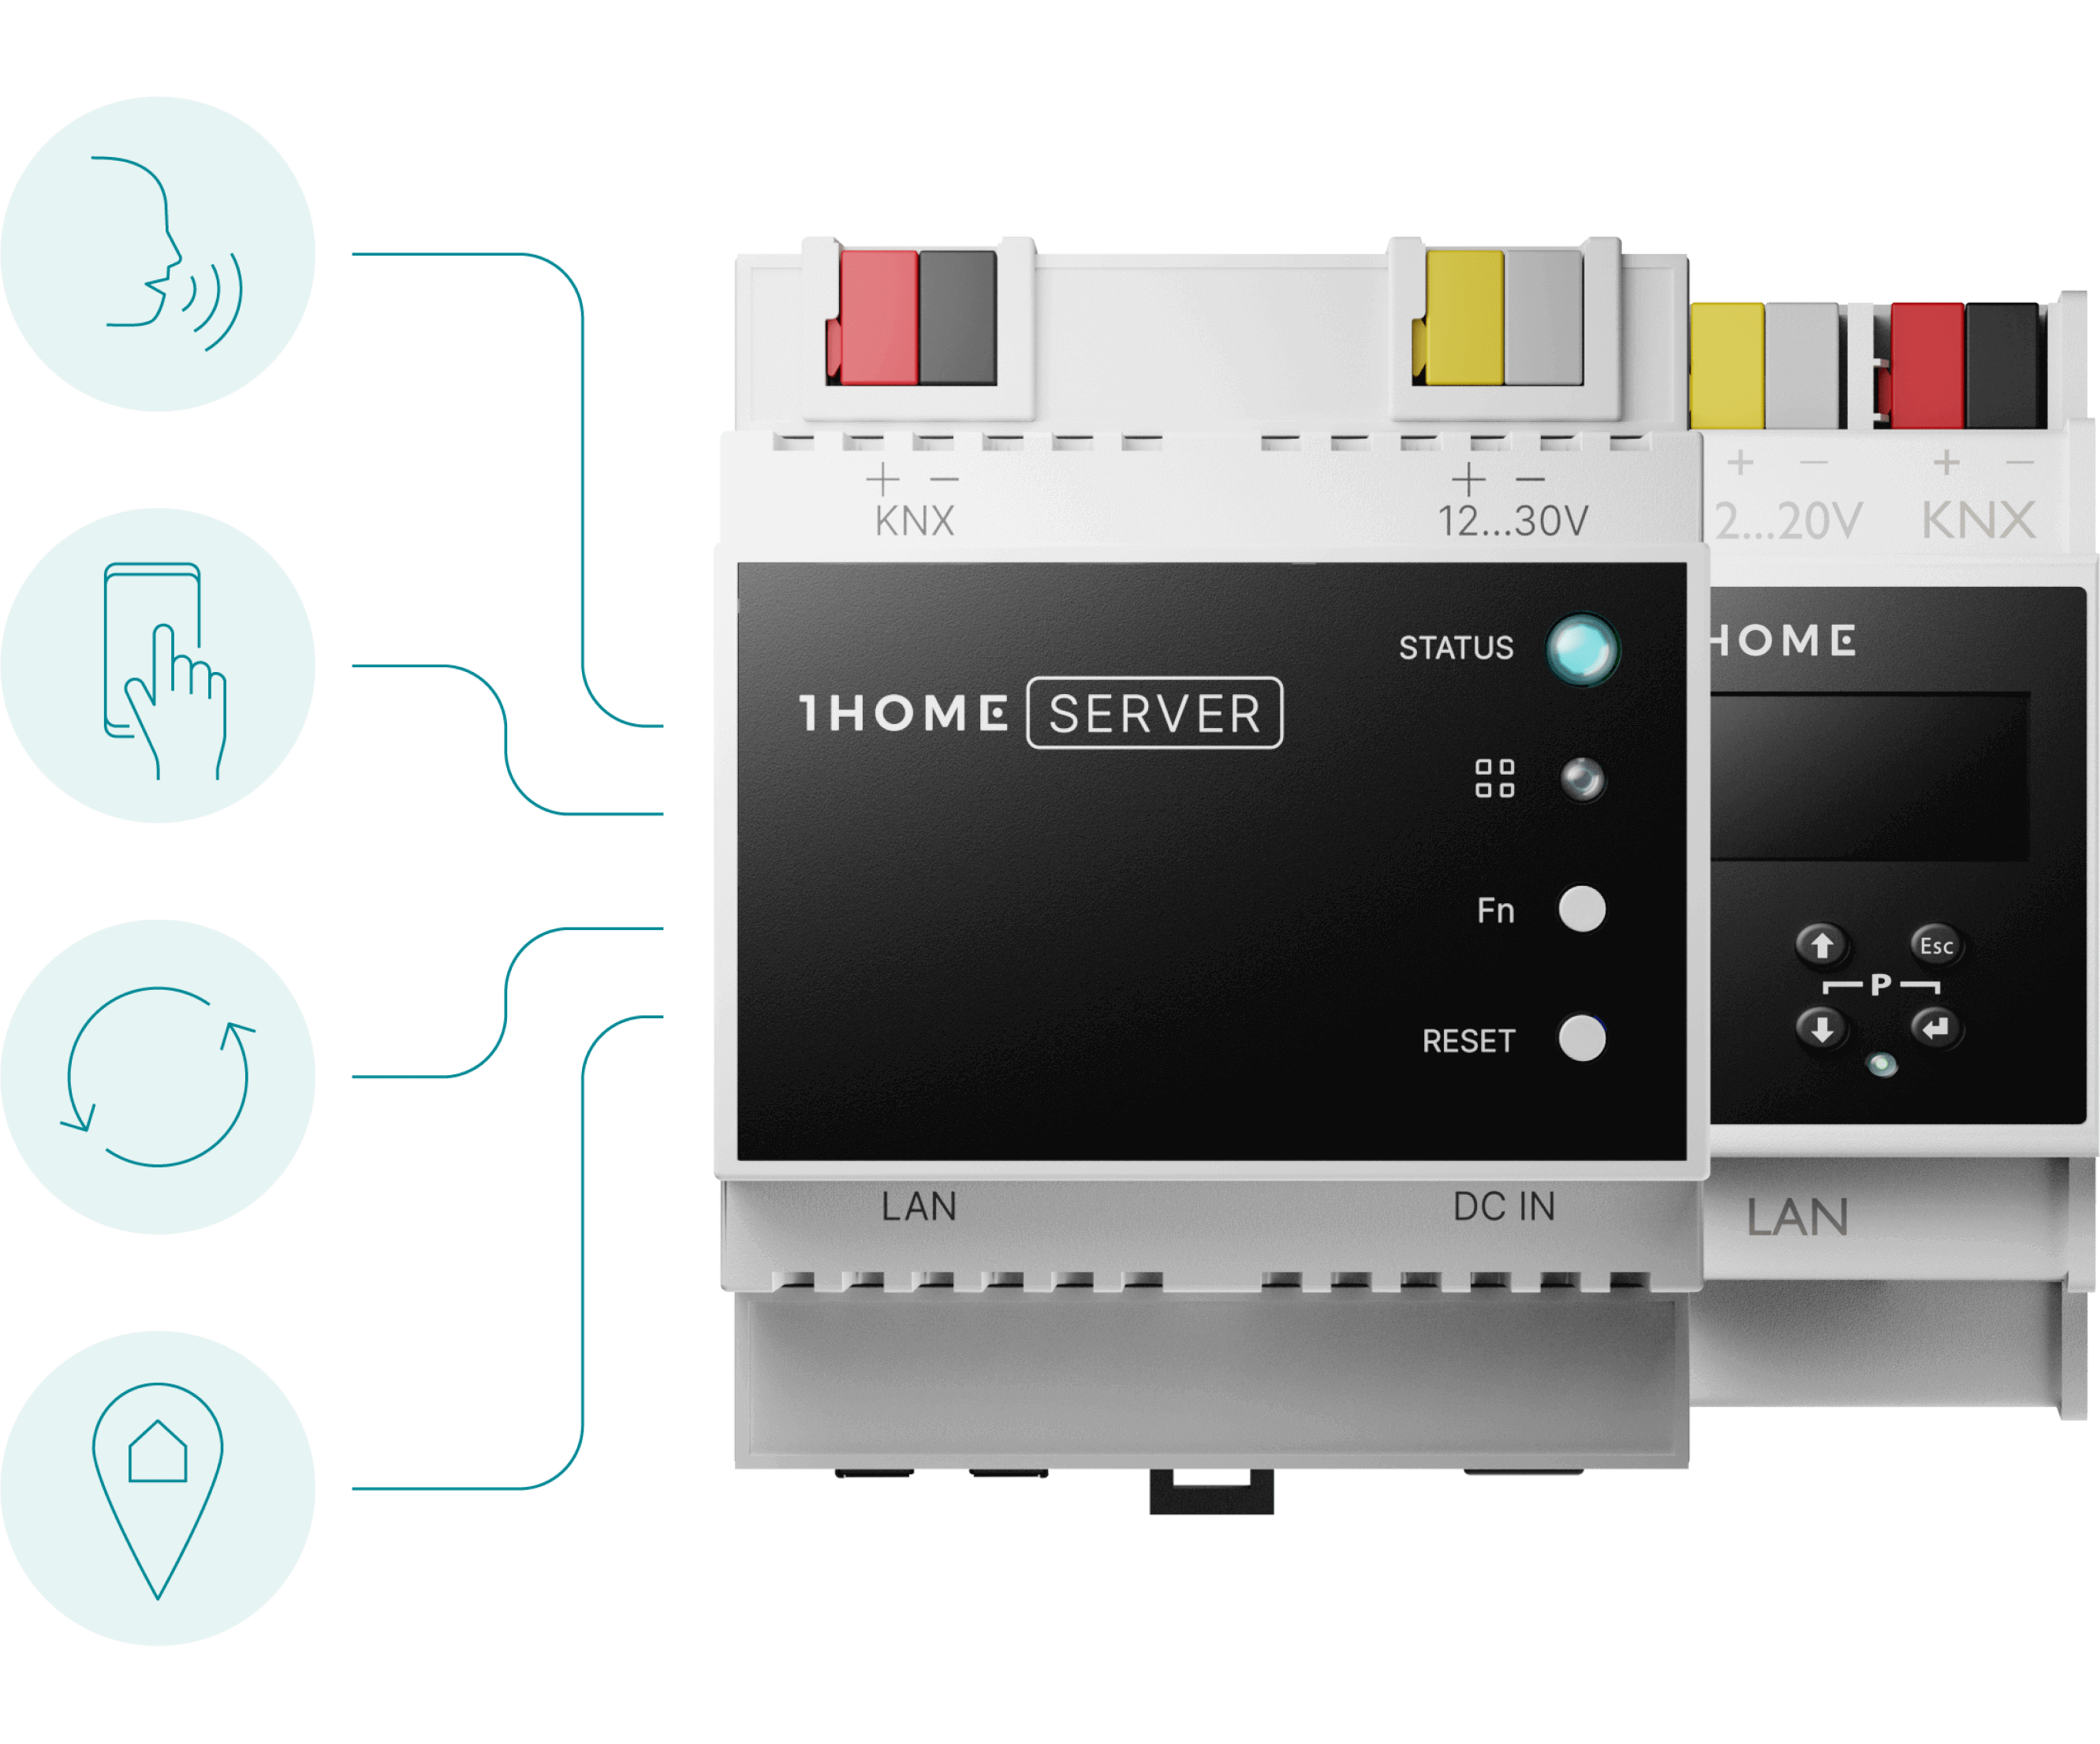 Amazon Alexa for KNX smart home with 1Home